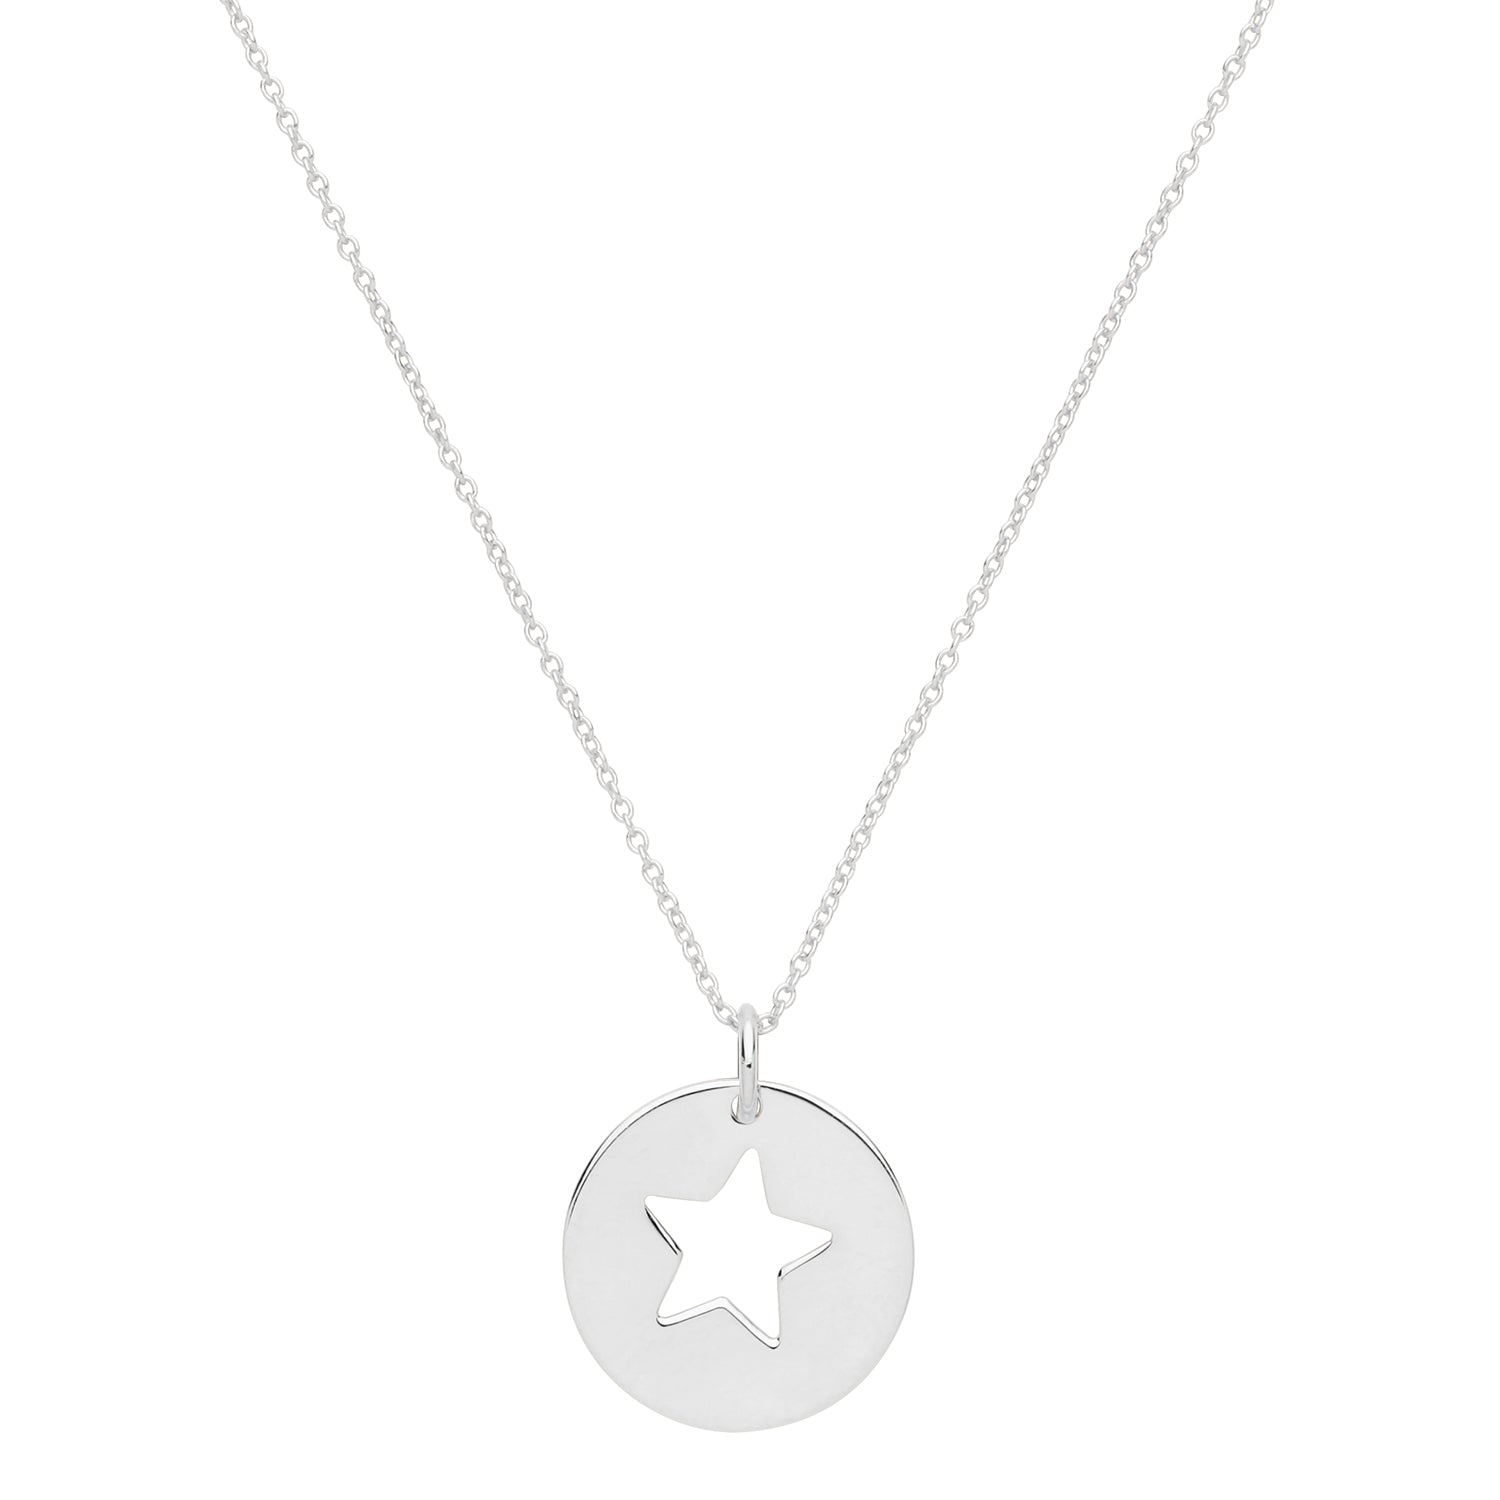 SILVER RHODIUM PLATED STAR DISC NECKLET